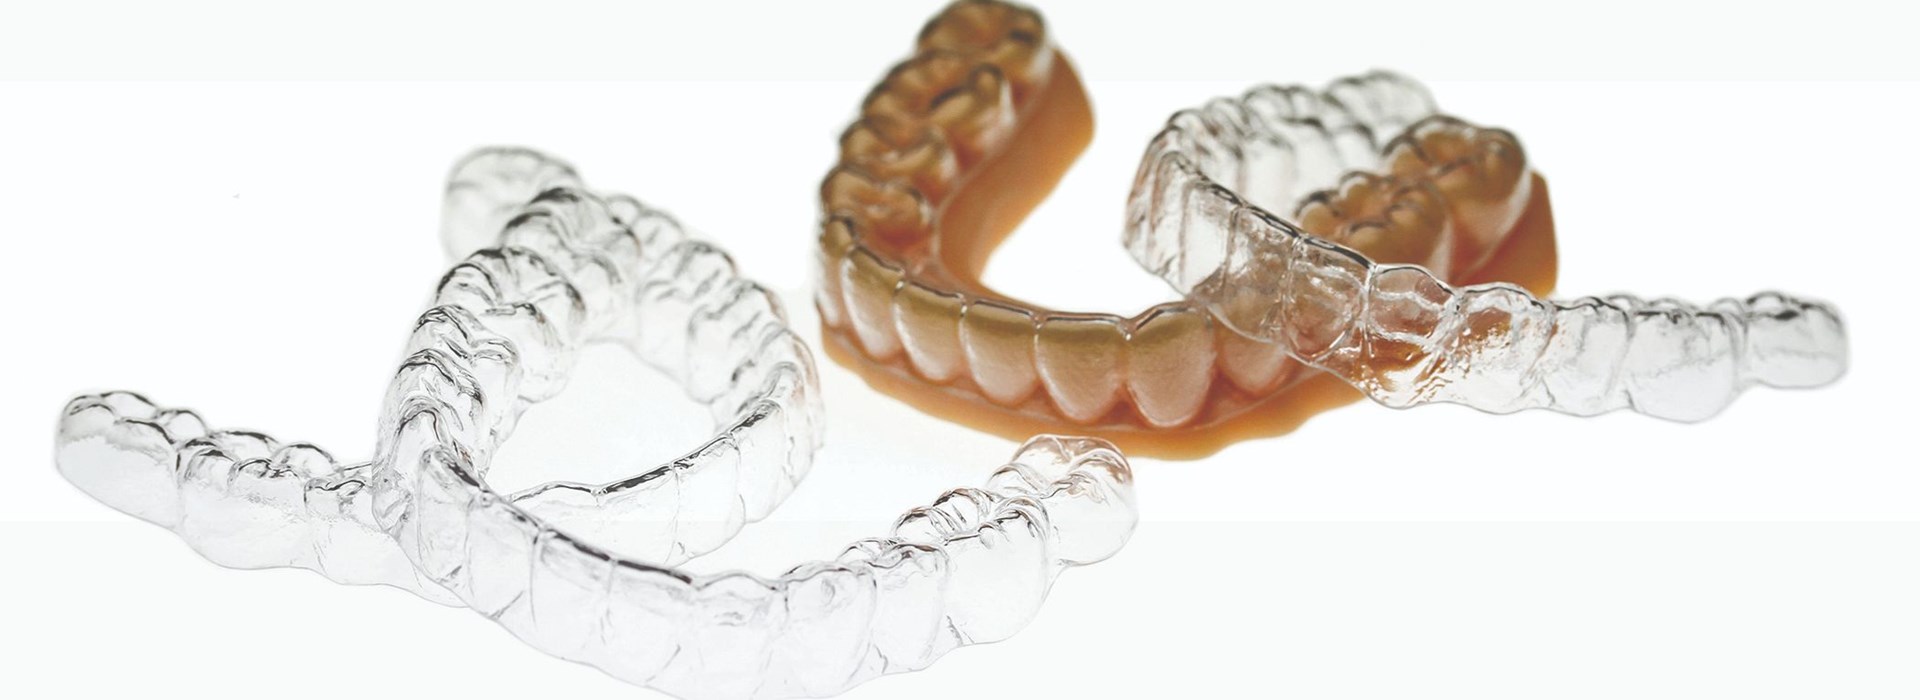 Specialty Appliances, a digital orthodontic laboratory, uses Stratasys 3D printers to help manufacture these invisible retainers. 3D printing has helped the lab expand its business.